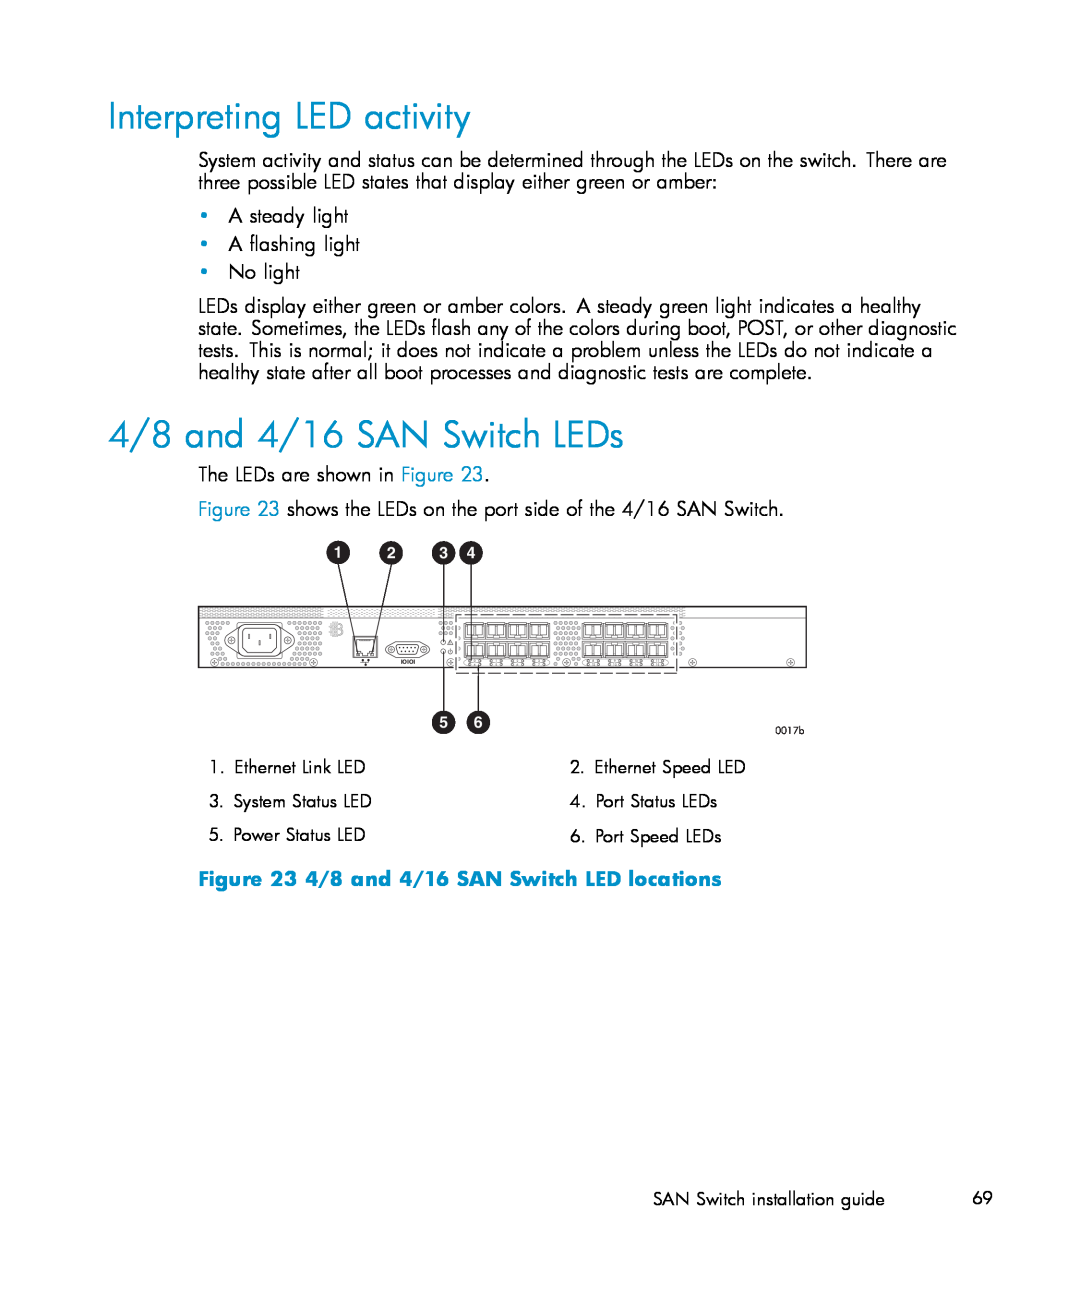 IBM AA-RWF3A-TE manual Interpreting LED activity, 4/8 and 4/16 SAN Switch LEDs, 4/8 and 4/16 SAN Switch LED locations 